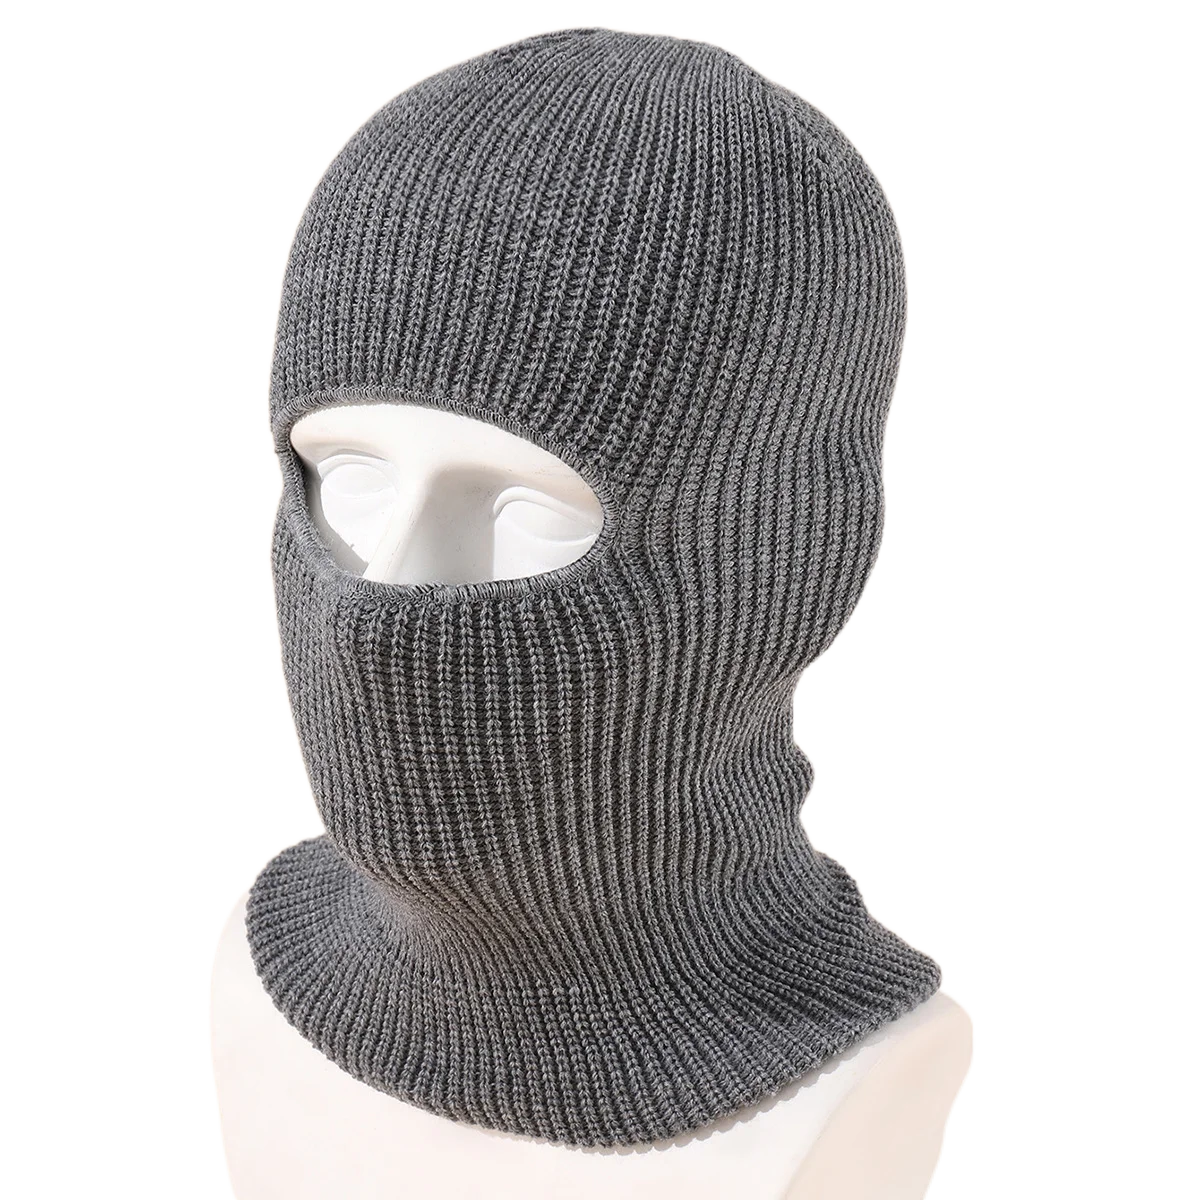 

Ski Mask Soft Acrylic Winter Balaclava Stay Warm and Comfortable Face Cover for Men Women Breathable Beanie Caps Free Shipping